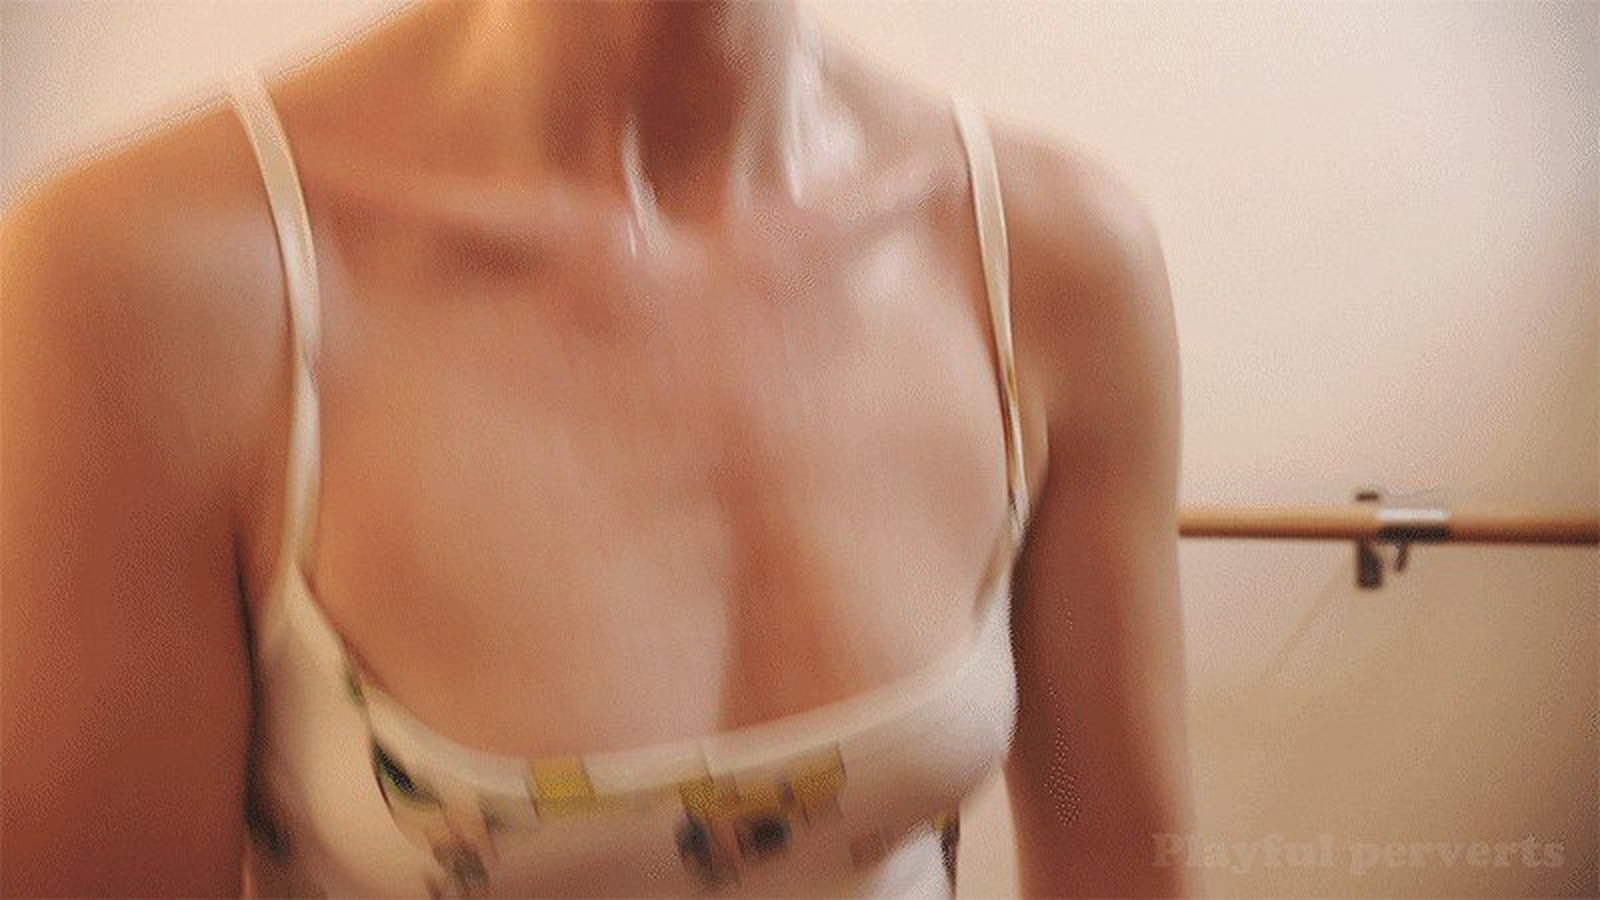 Photo by PlayfulPerverts with the username @PlayfulPerverts,  April 30, 2022 at 1:59 PM. The post is about the topic Stinky and Sweaty and the text says 'Close up on sweating chest in leotard during cardio workout. Full video on PH.

Check full video: https://www.pornhub.com/view_video.php?viewkey=ph626675eeaa791

#Sweat #SweatyGirl #Exercise #Leotard #Workout #Cardio #SmallTits #Sweating #SexyGif..'